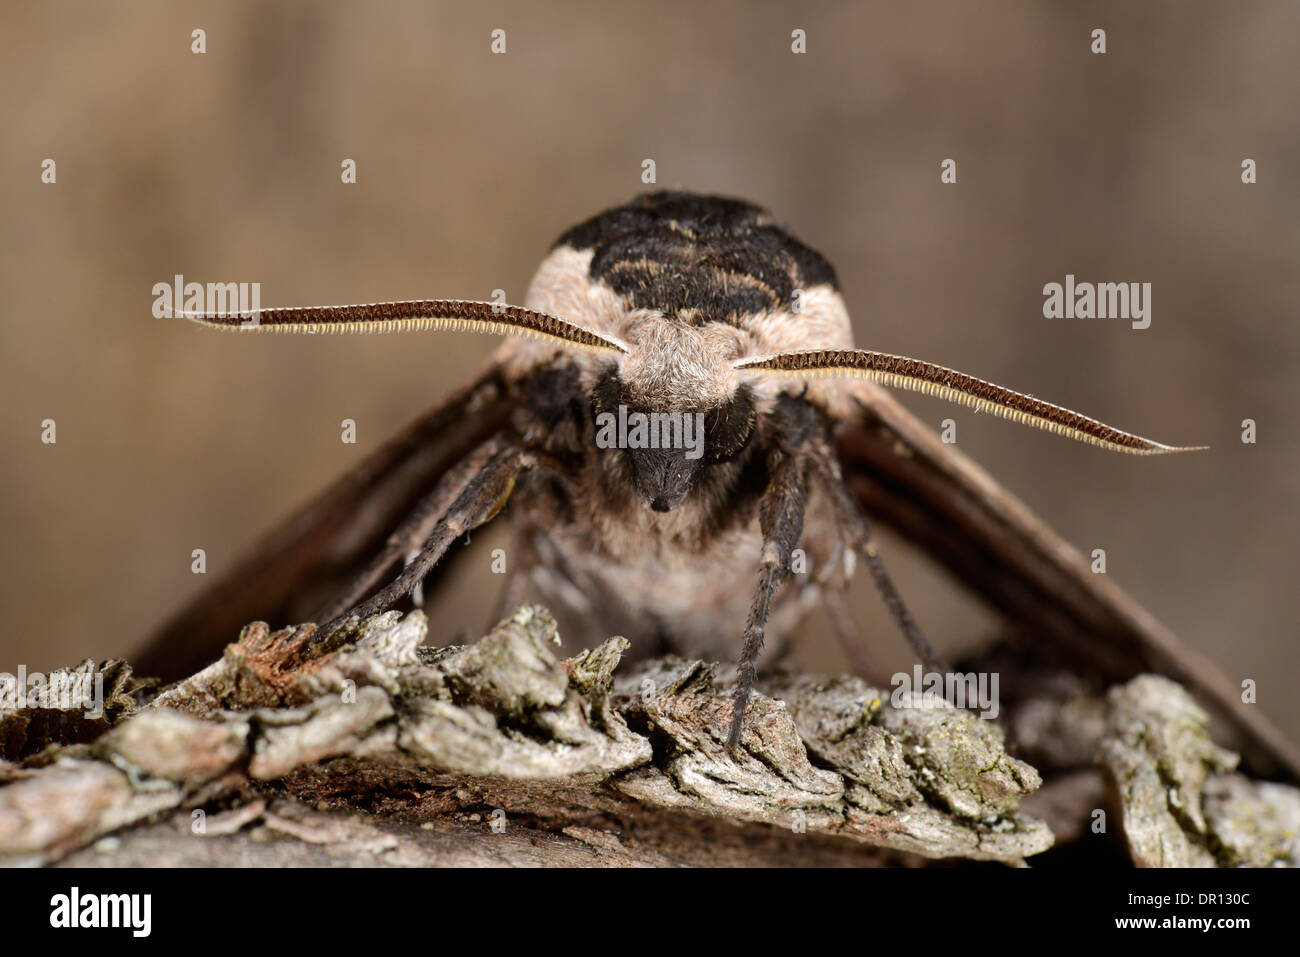 Privet Hawkmoth (Sphinx ligustri) close-up of head and antennae, Oxfordshire, England, July Stock Photo